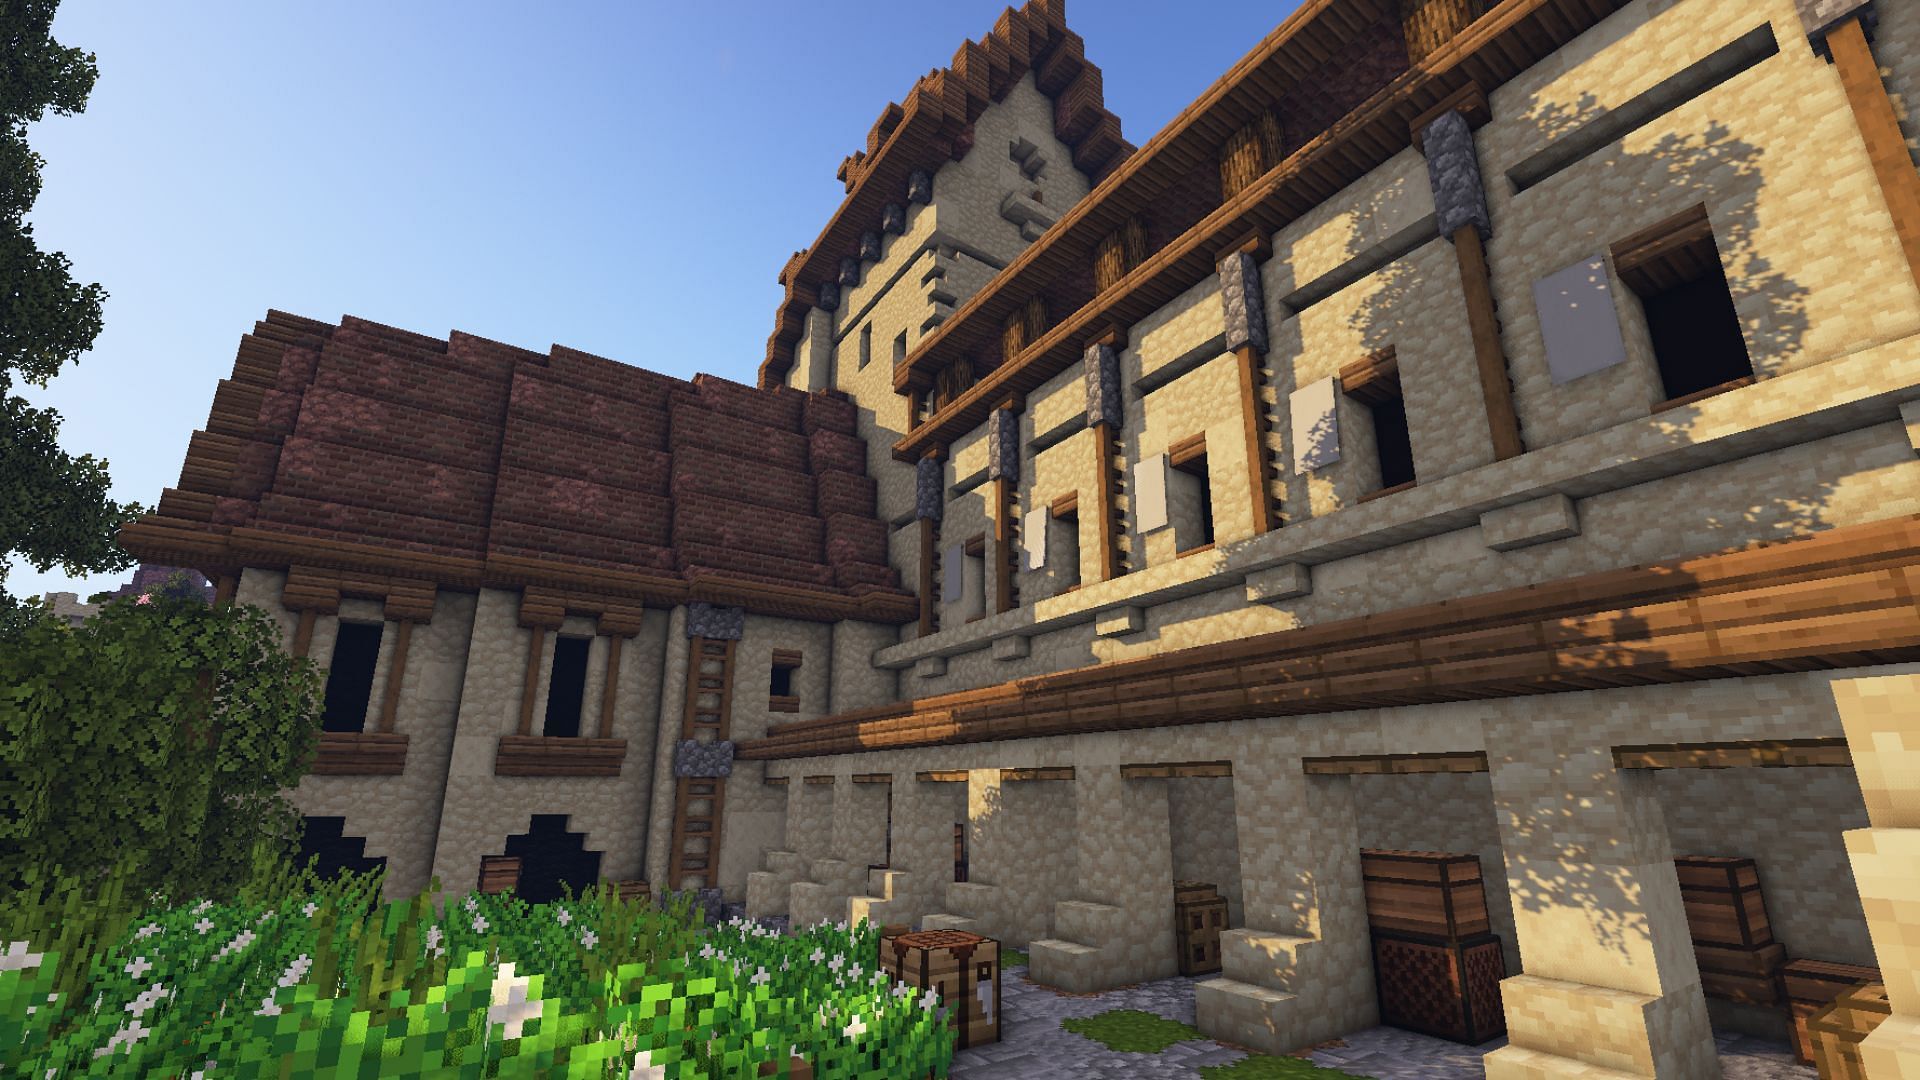 Stay True is one of the best texture packs close to vanilla Minecraft (Image via CurseForge)